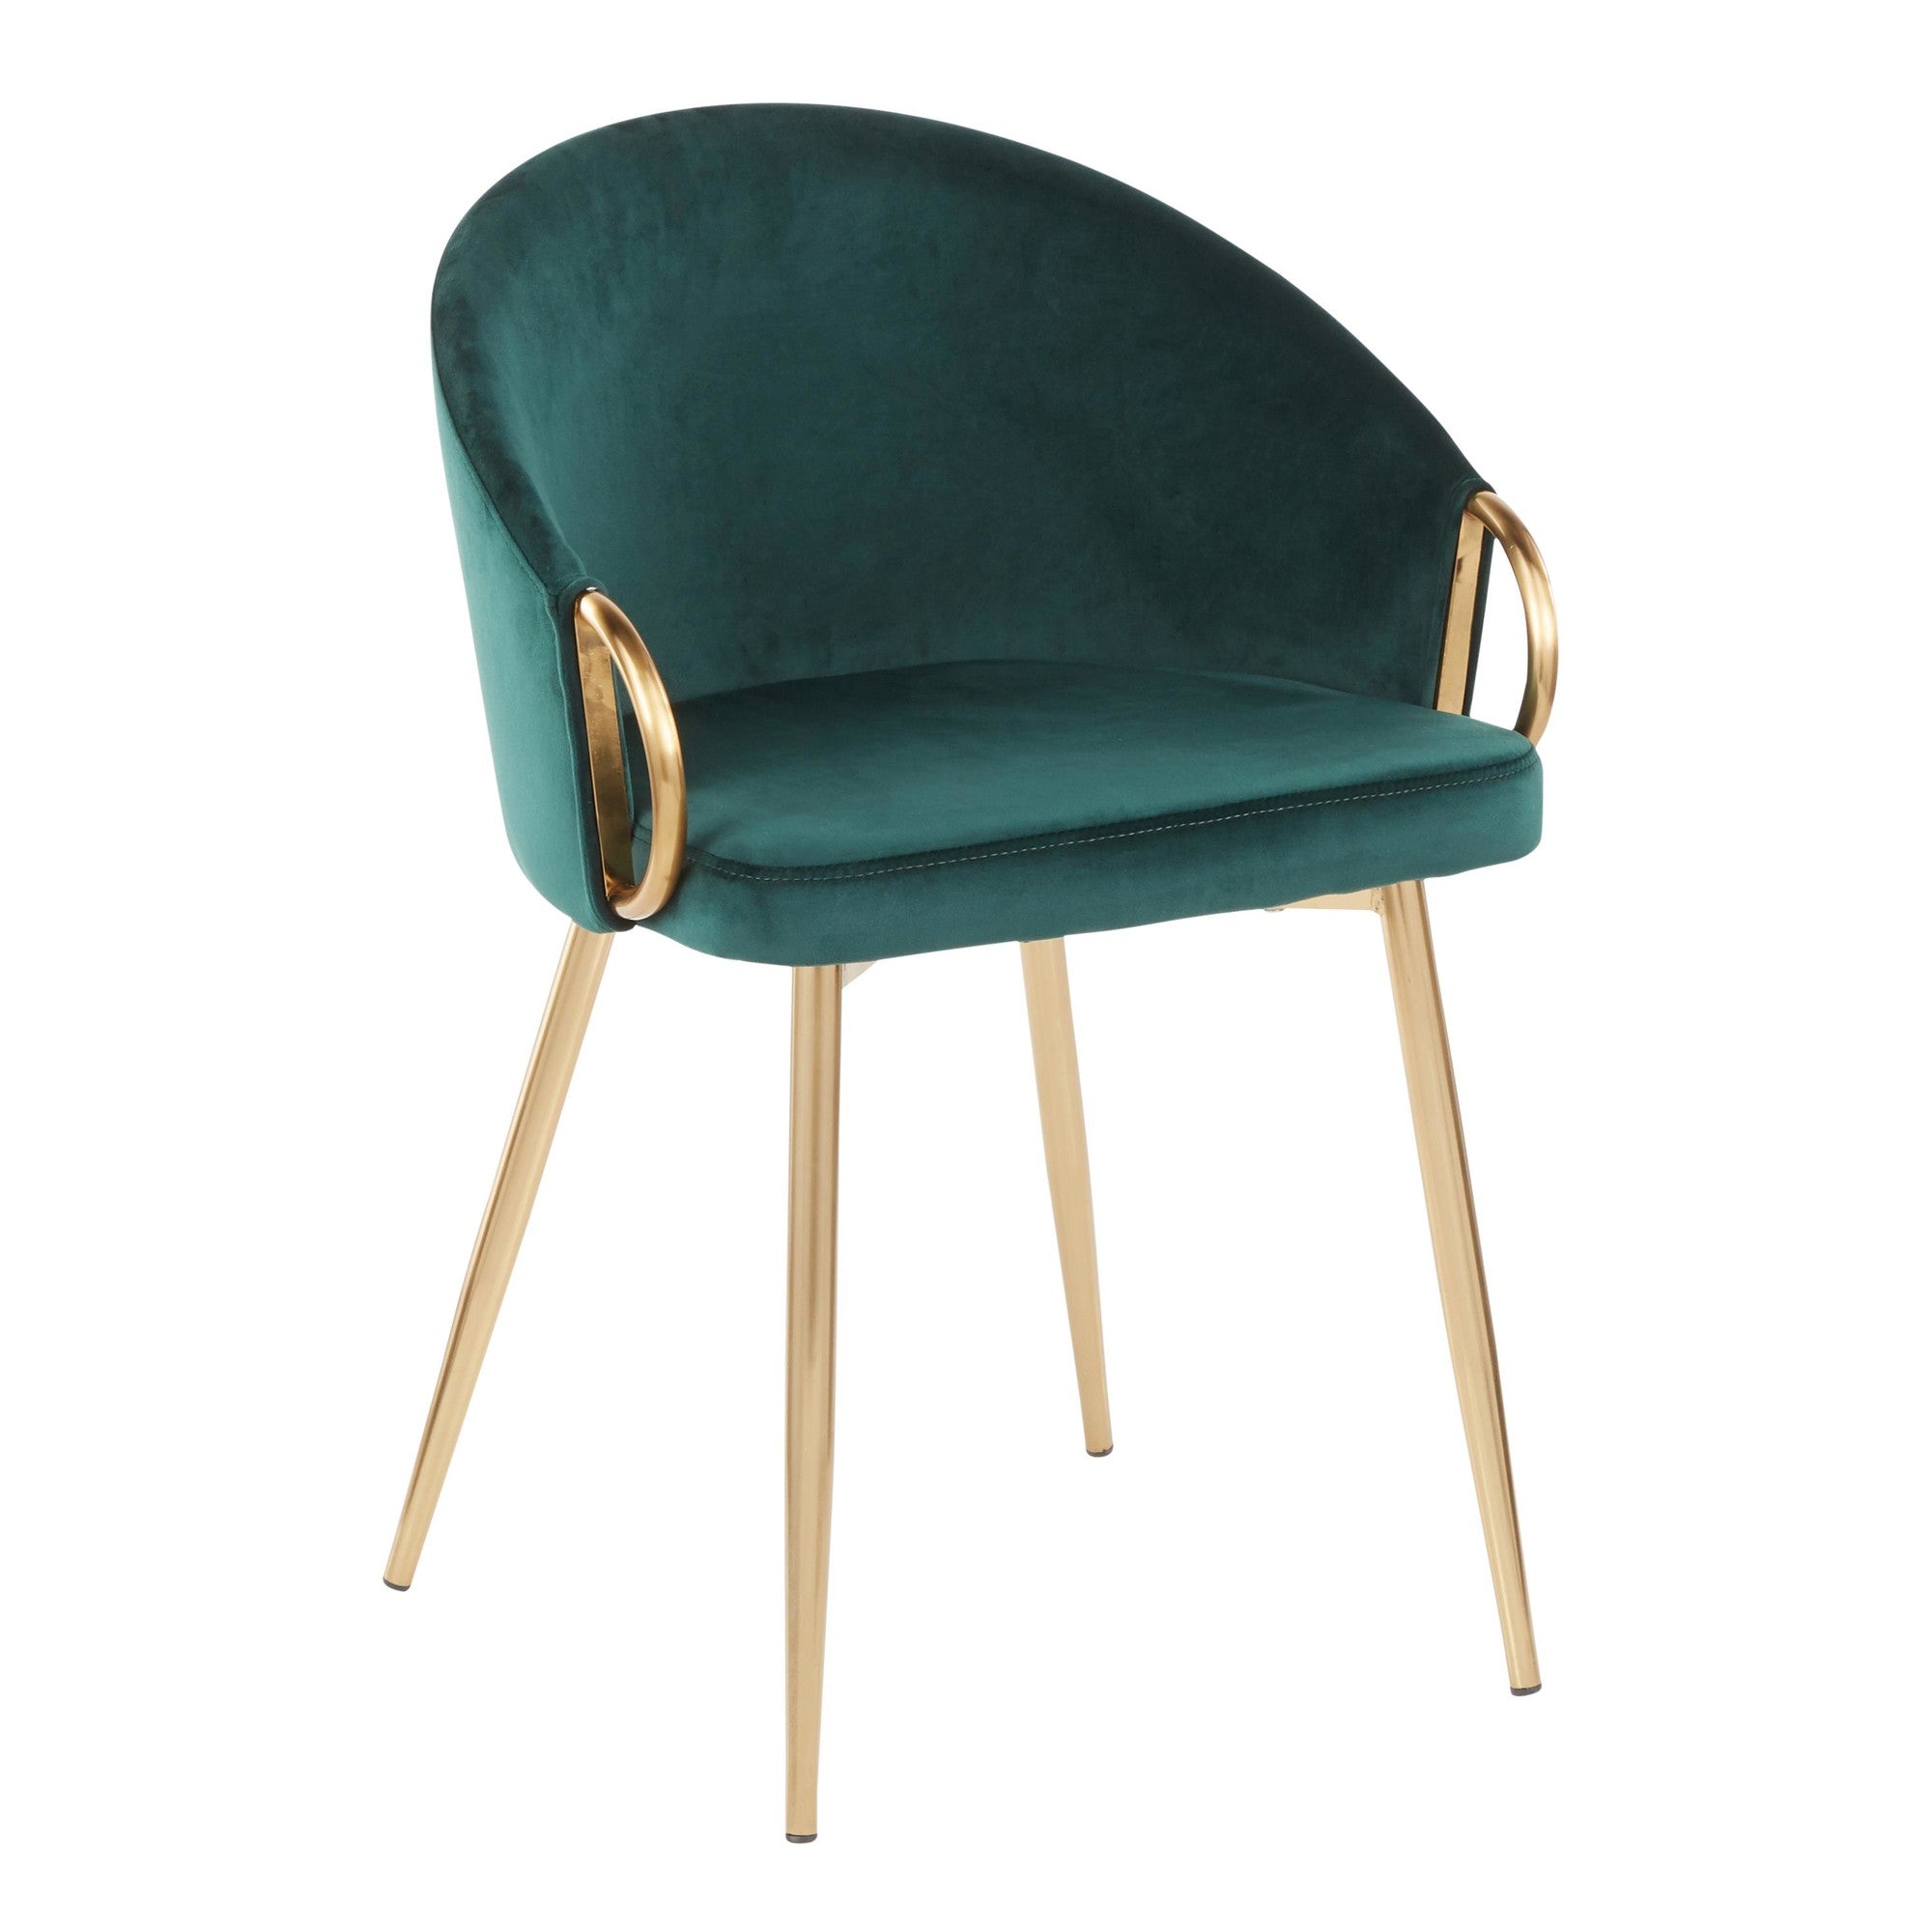 claire contemporaryglam chair in gold metal and emerald green velvet lumisource